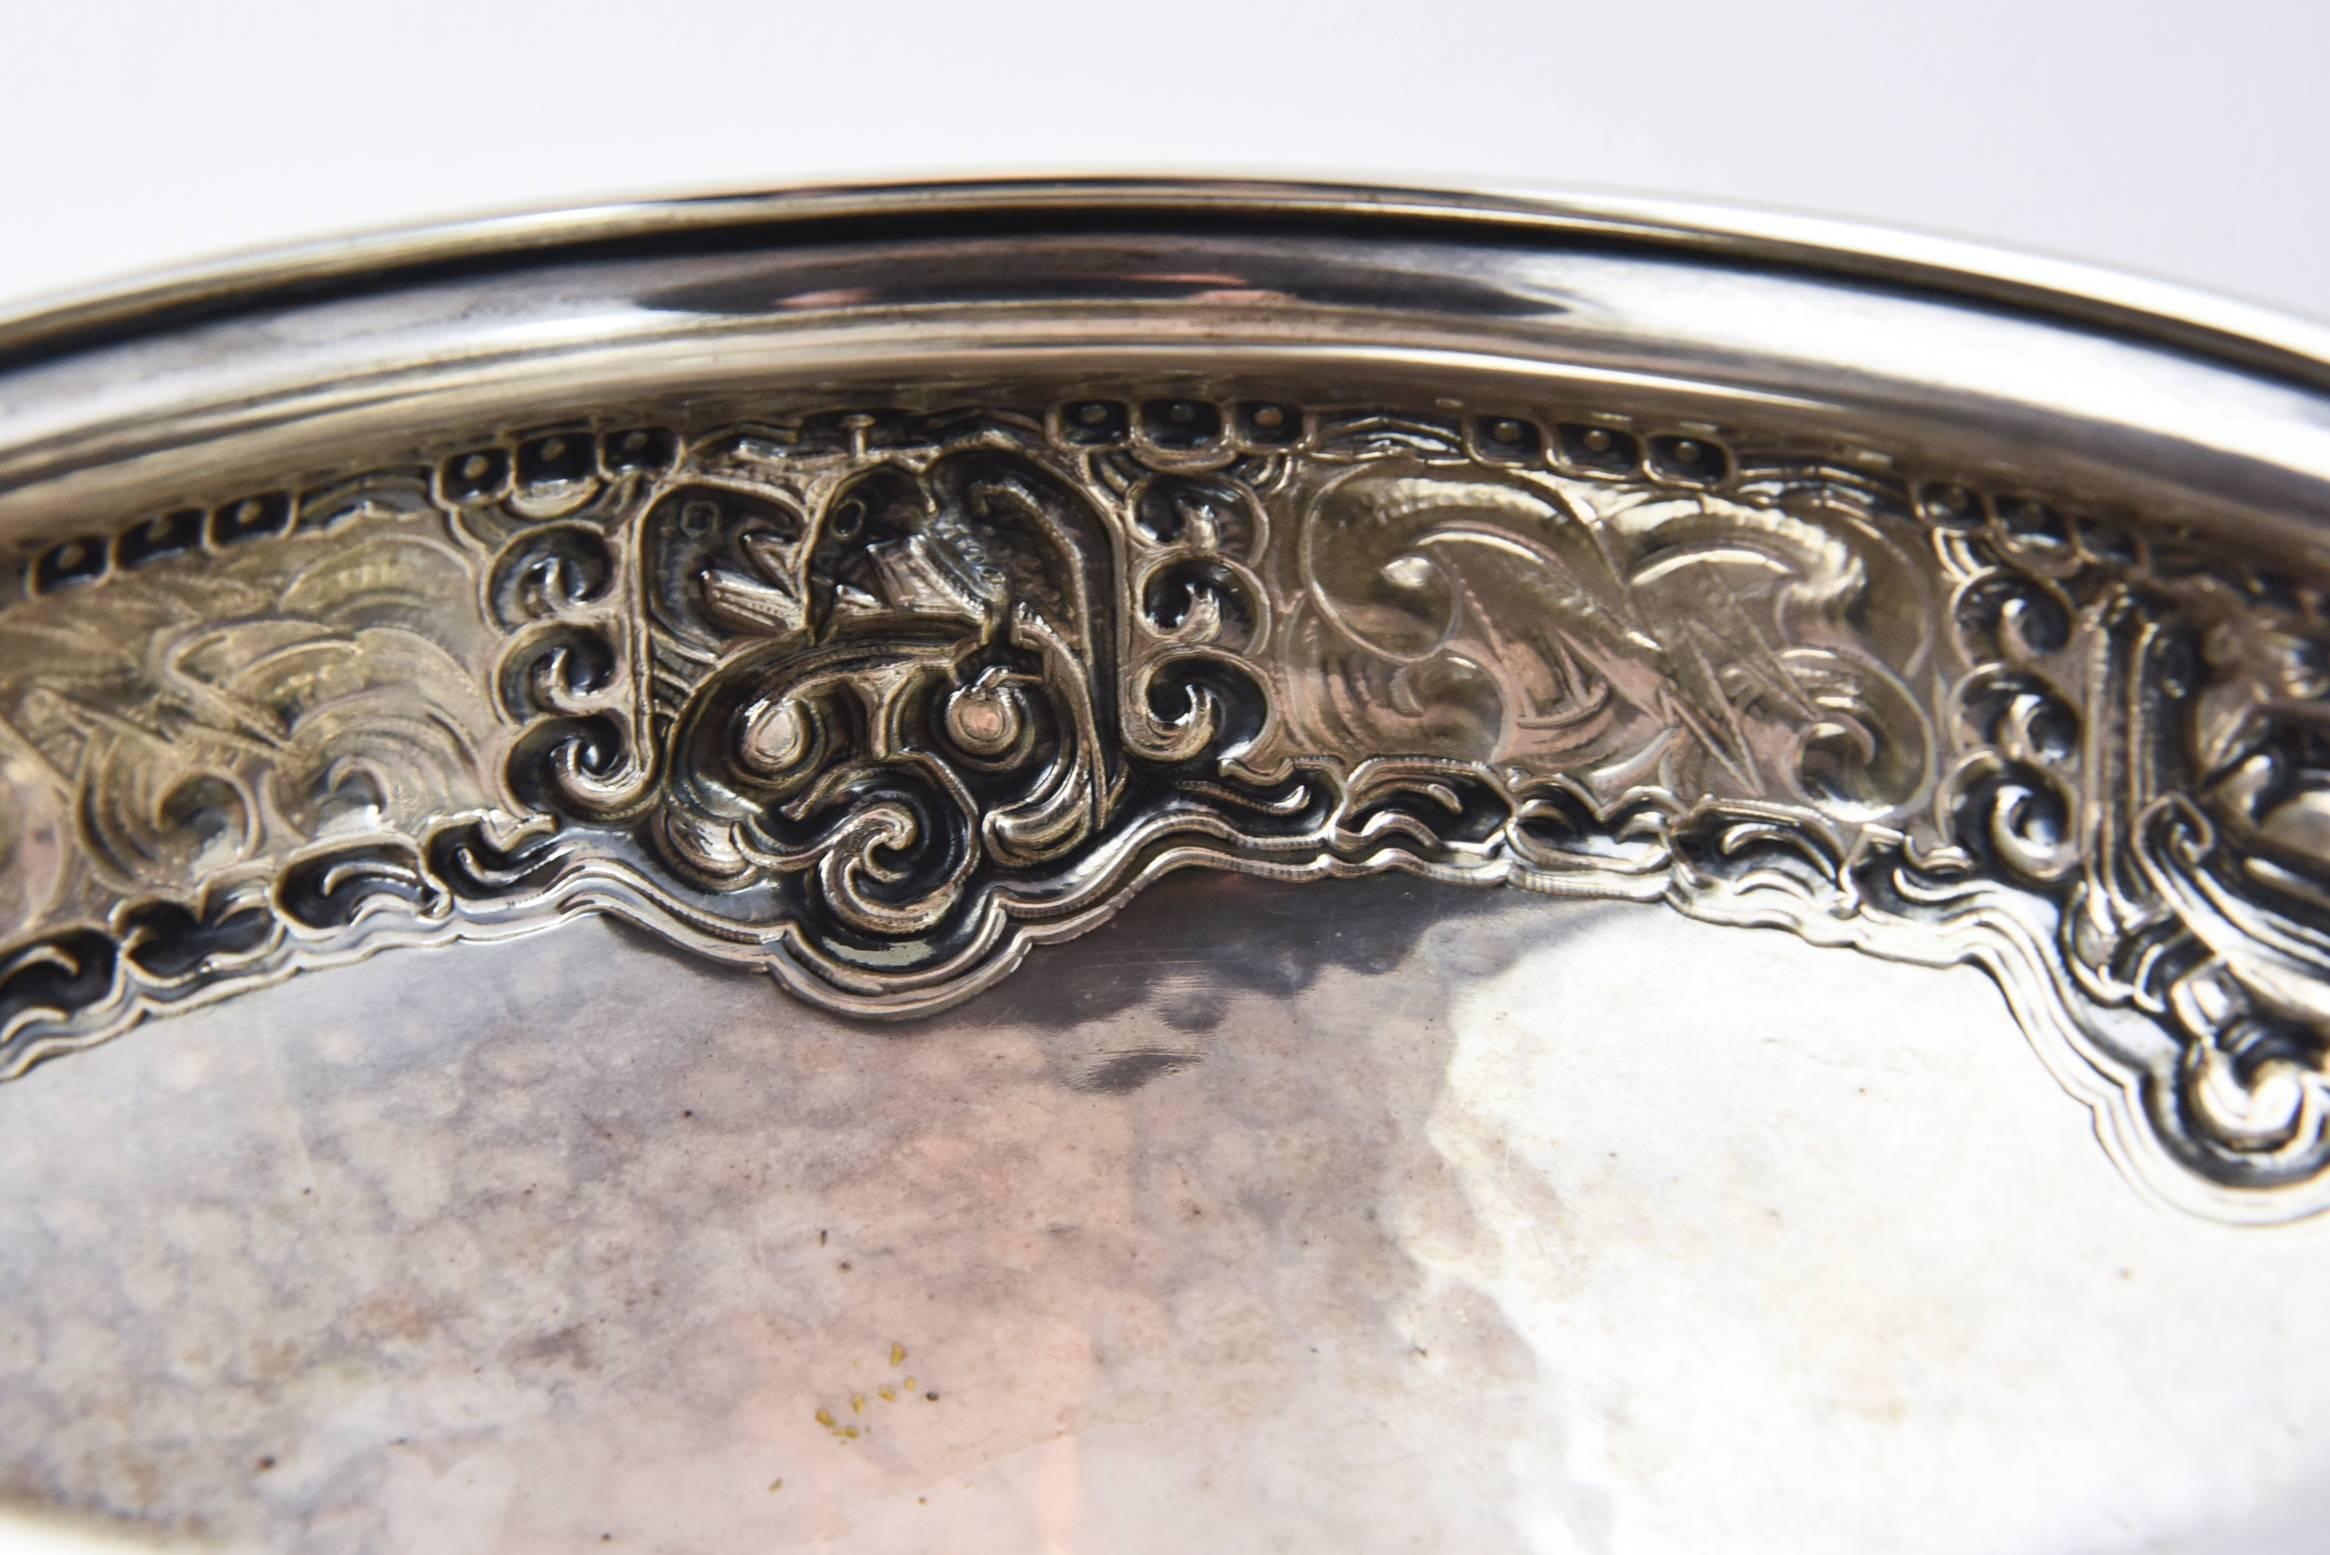 Norwegian Ornate Nordic Arts & Crafts Bowl by Oslo Silversmith Thune For Sale